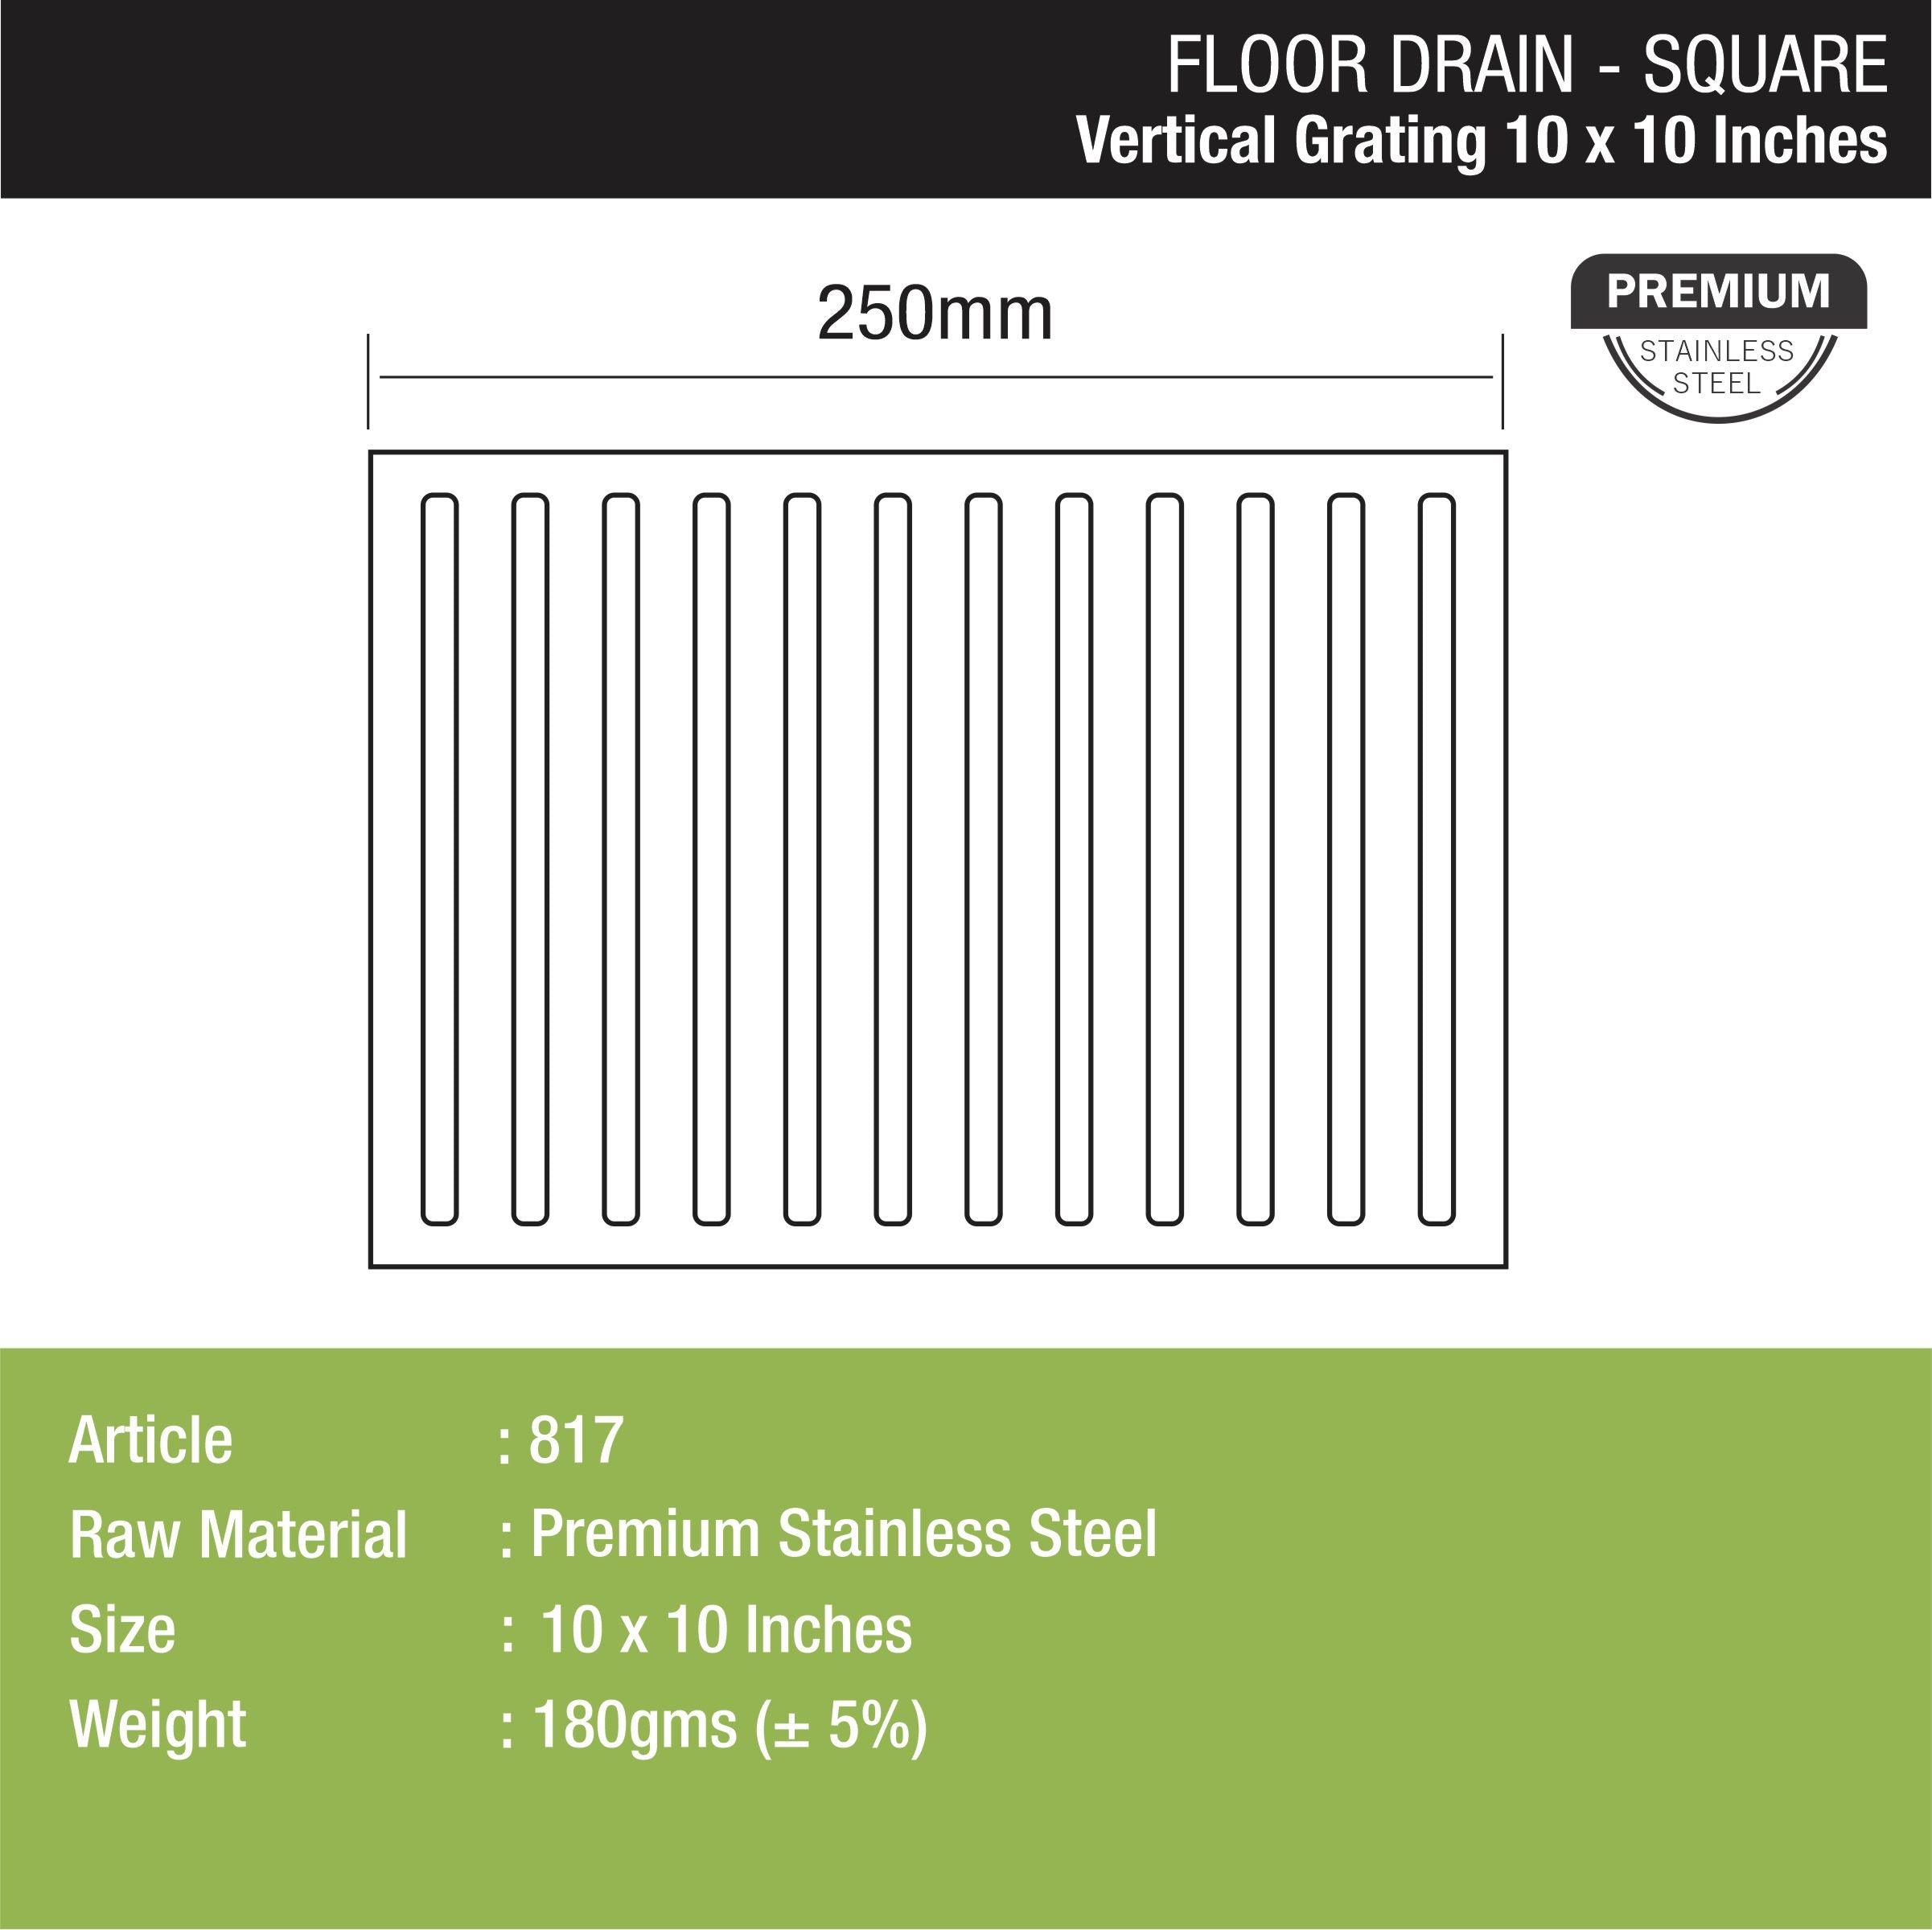 Vertical Grating Top (10 x 10 inches) - LIPKA